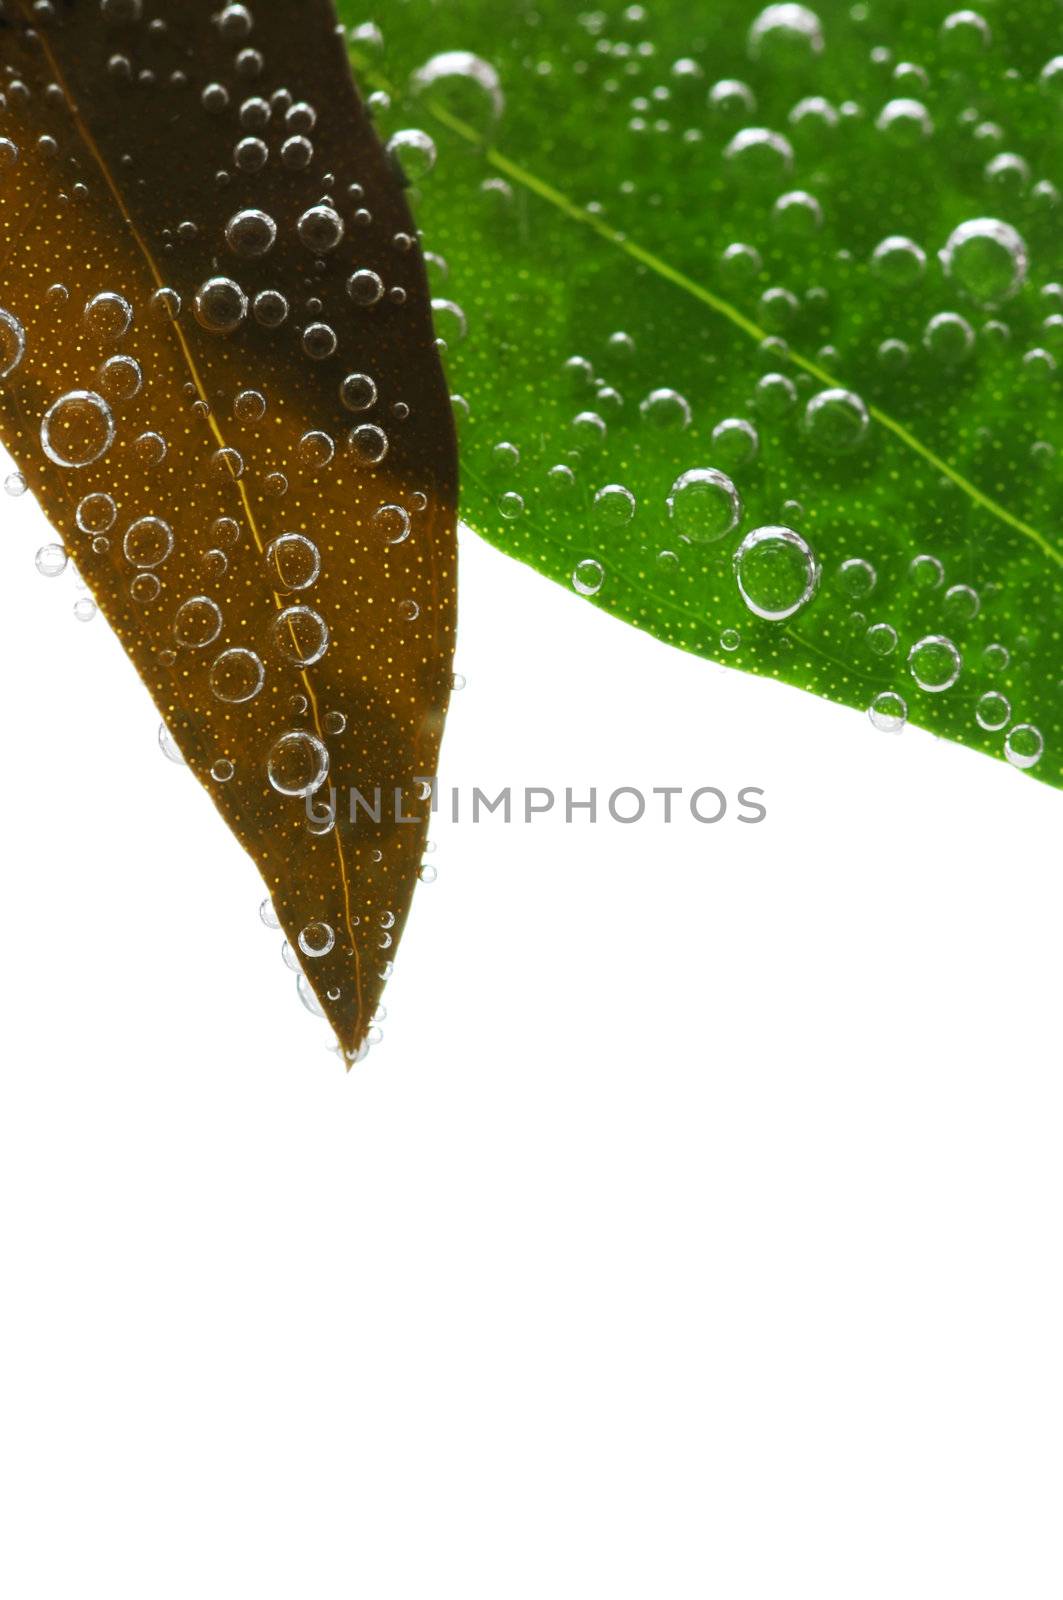 Green and brown leaves of a plant submerged in water with air bubbles